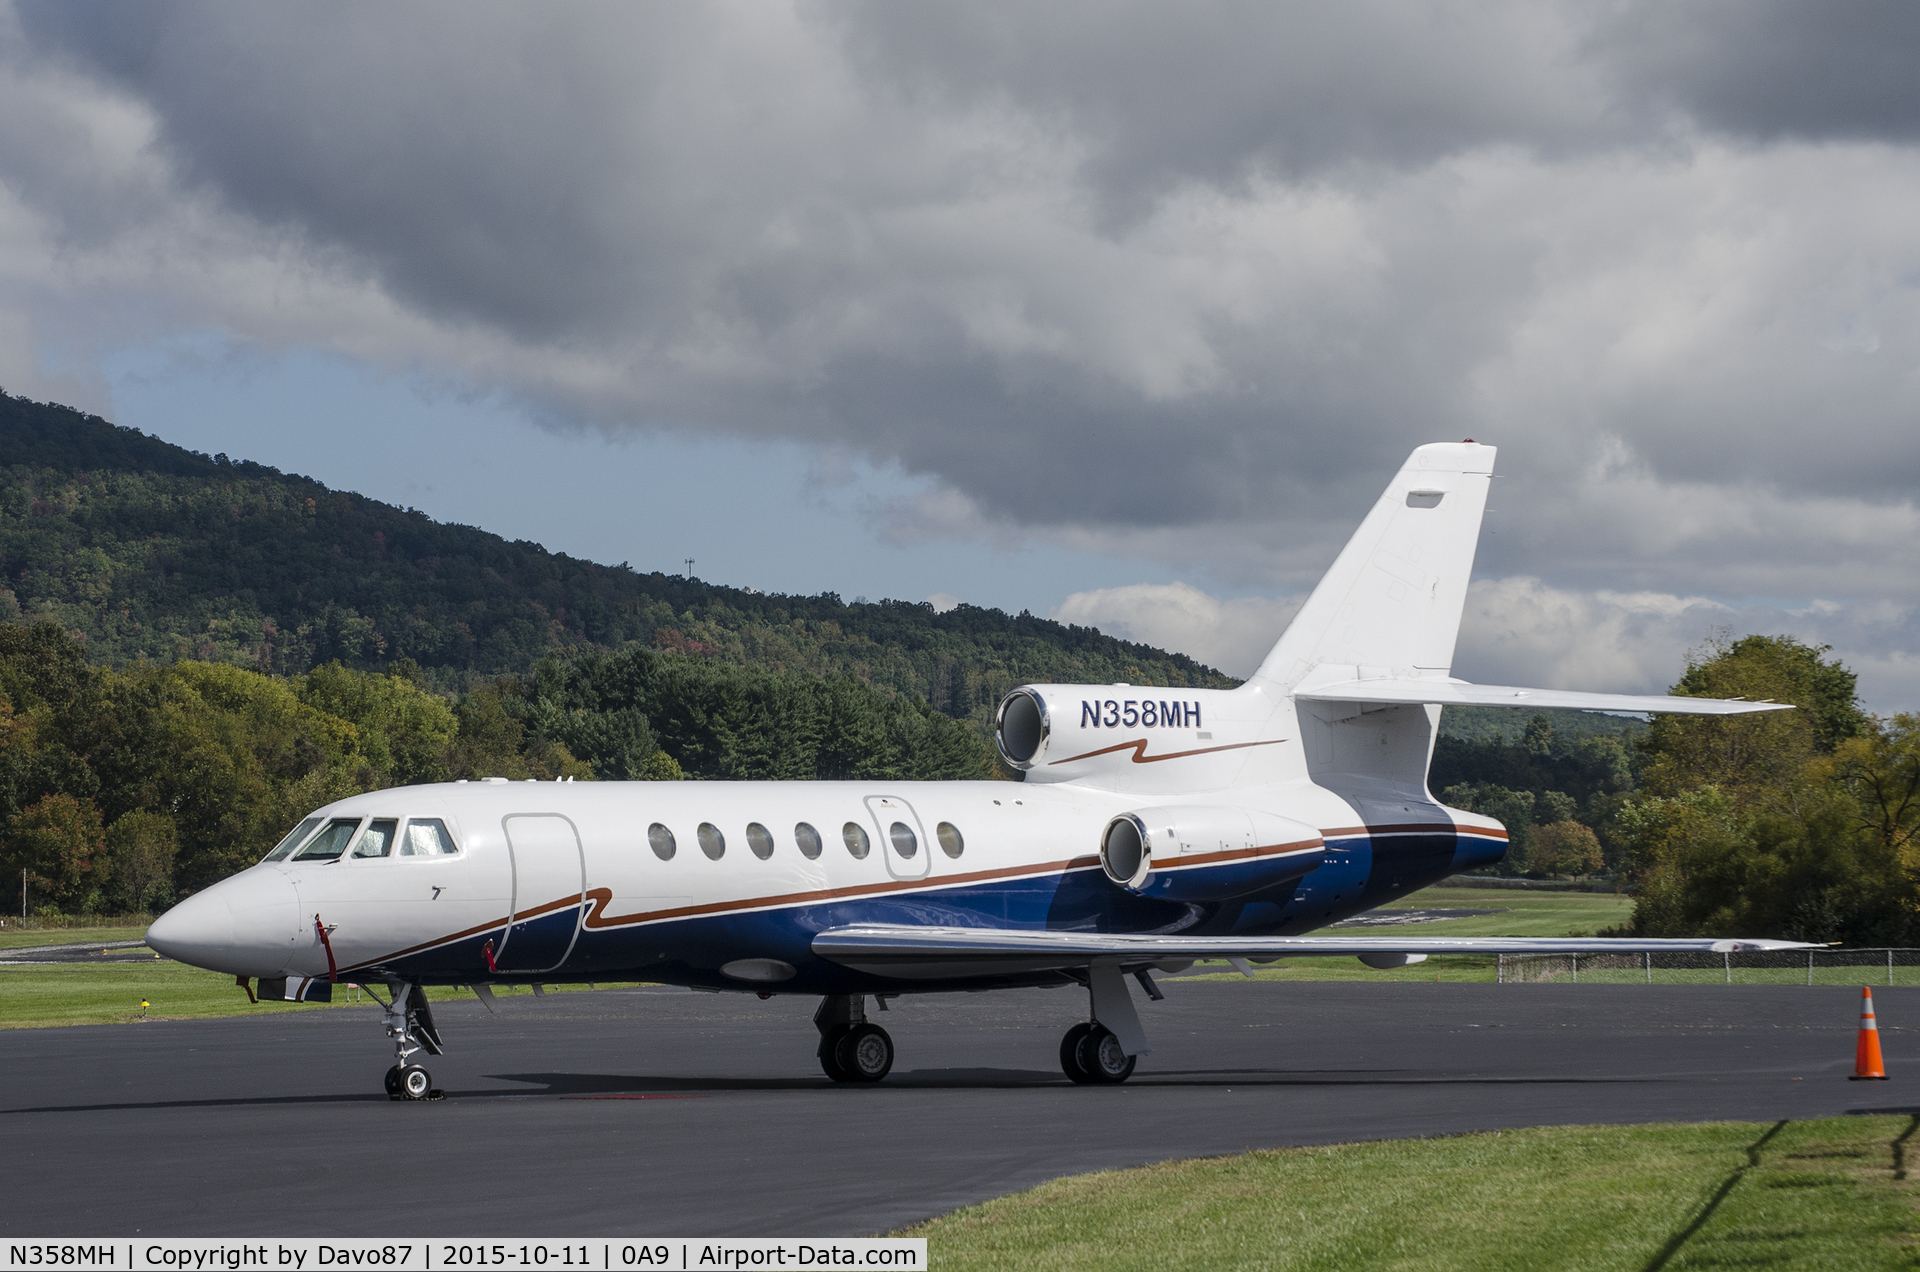 N358MH, 1990 Dassault Falcon 50 C/N 209, Parked at the Elizabethton, TN airport (0A9) on October 11, 2015.